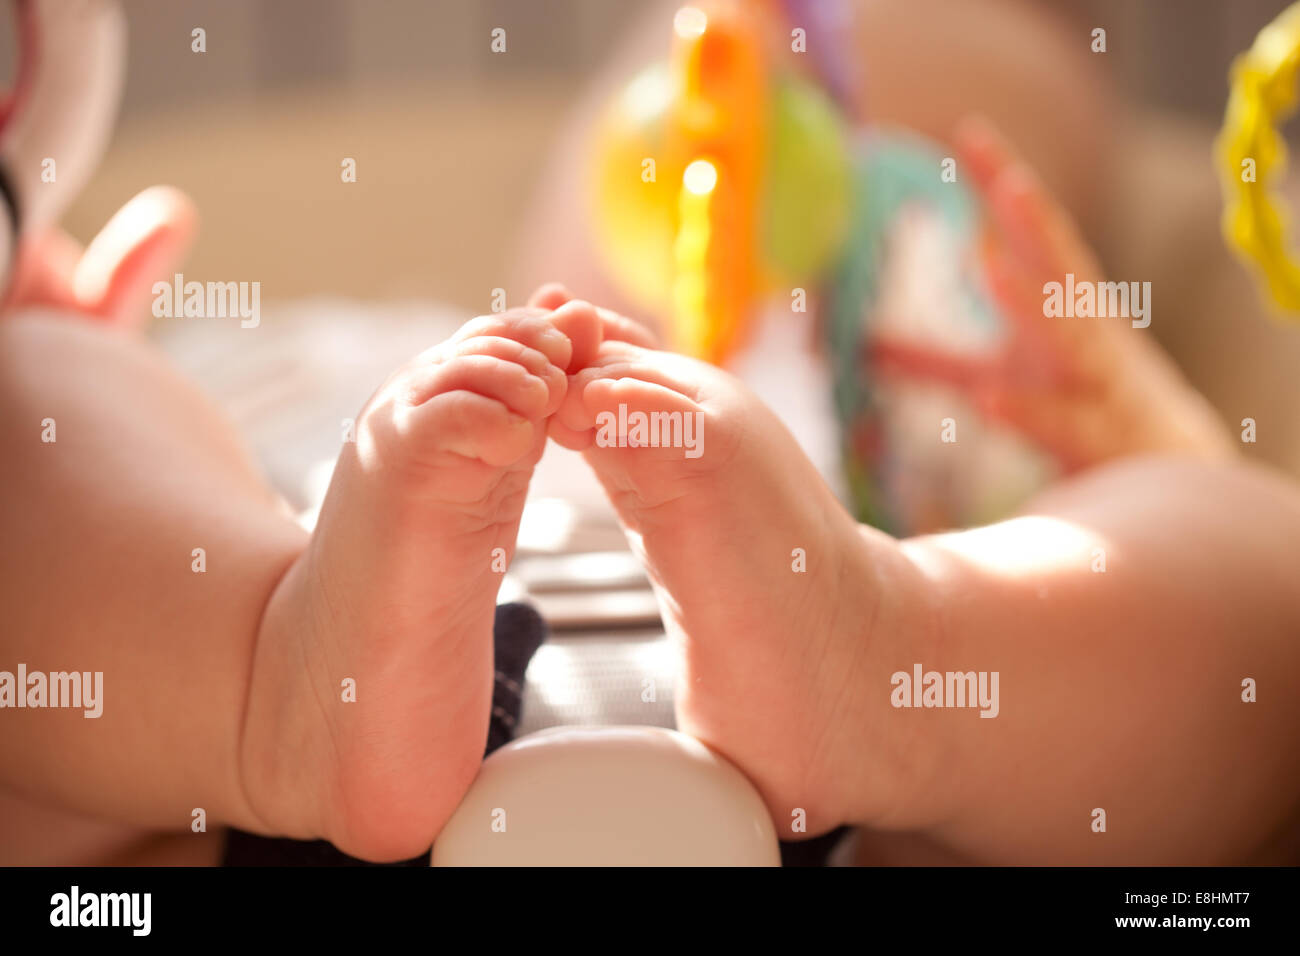 Baby feet close up. Kid playing with toys in the baby chair Stock Photo